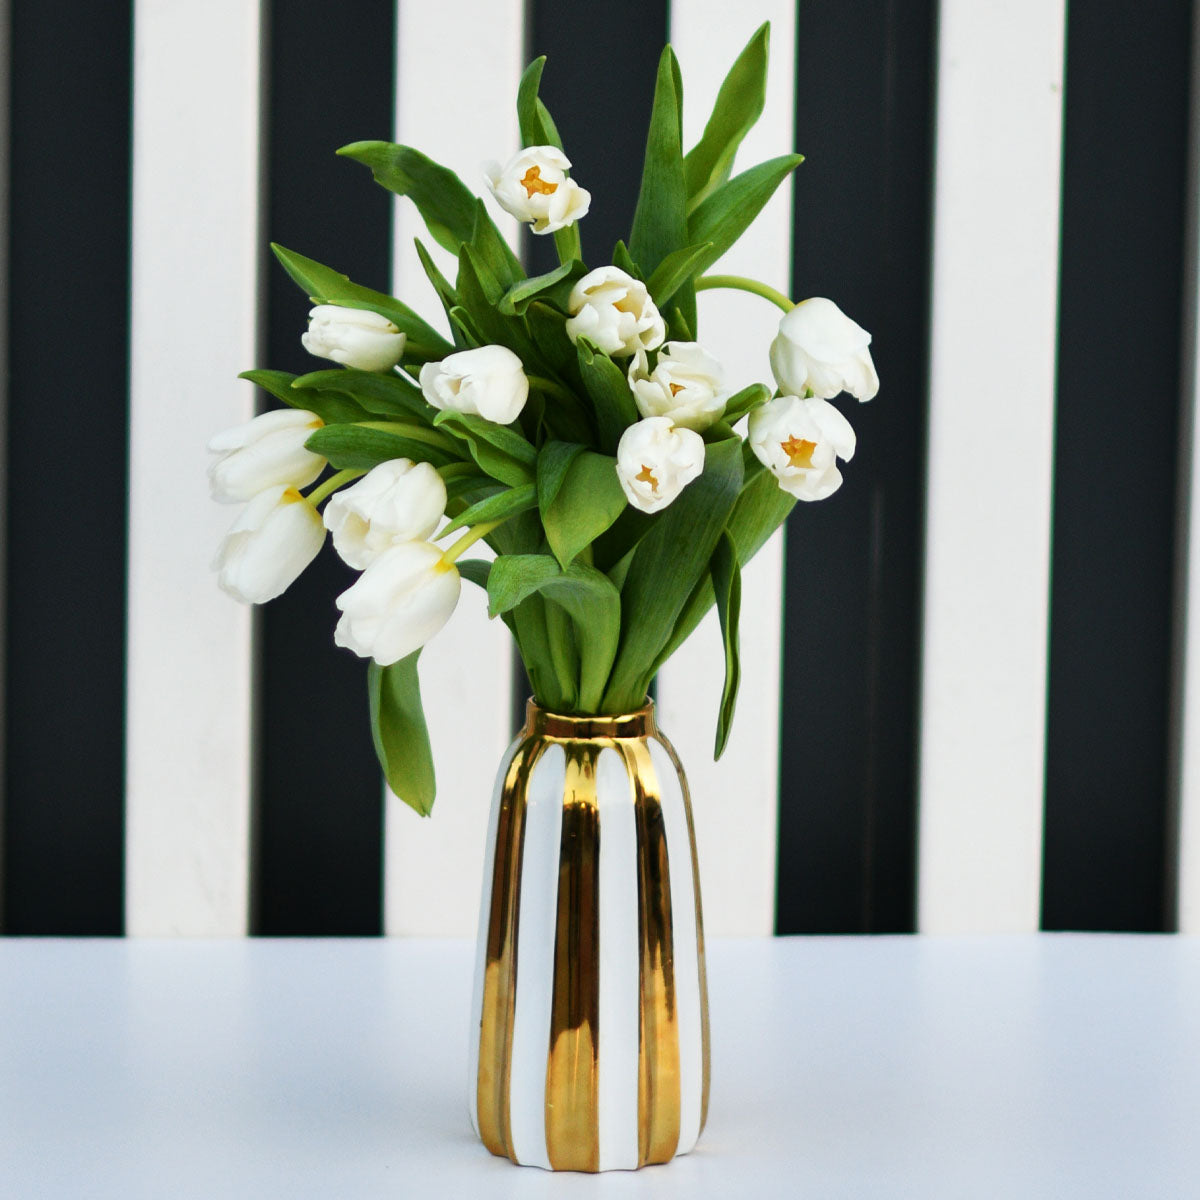 Clearly White  Tulip Arrangement on a Glass Vase